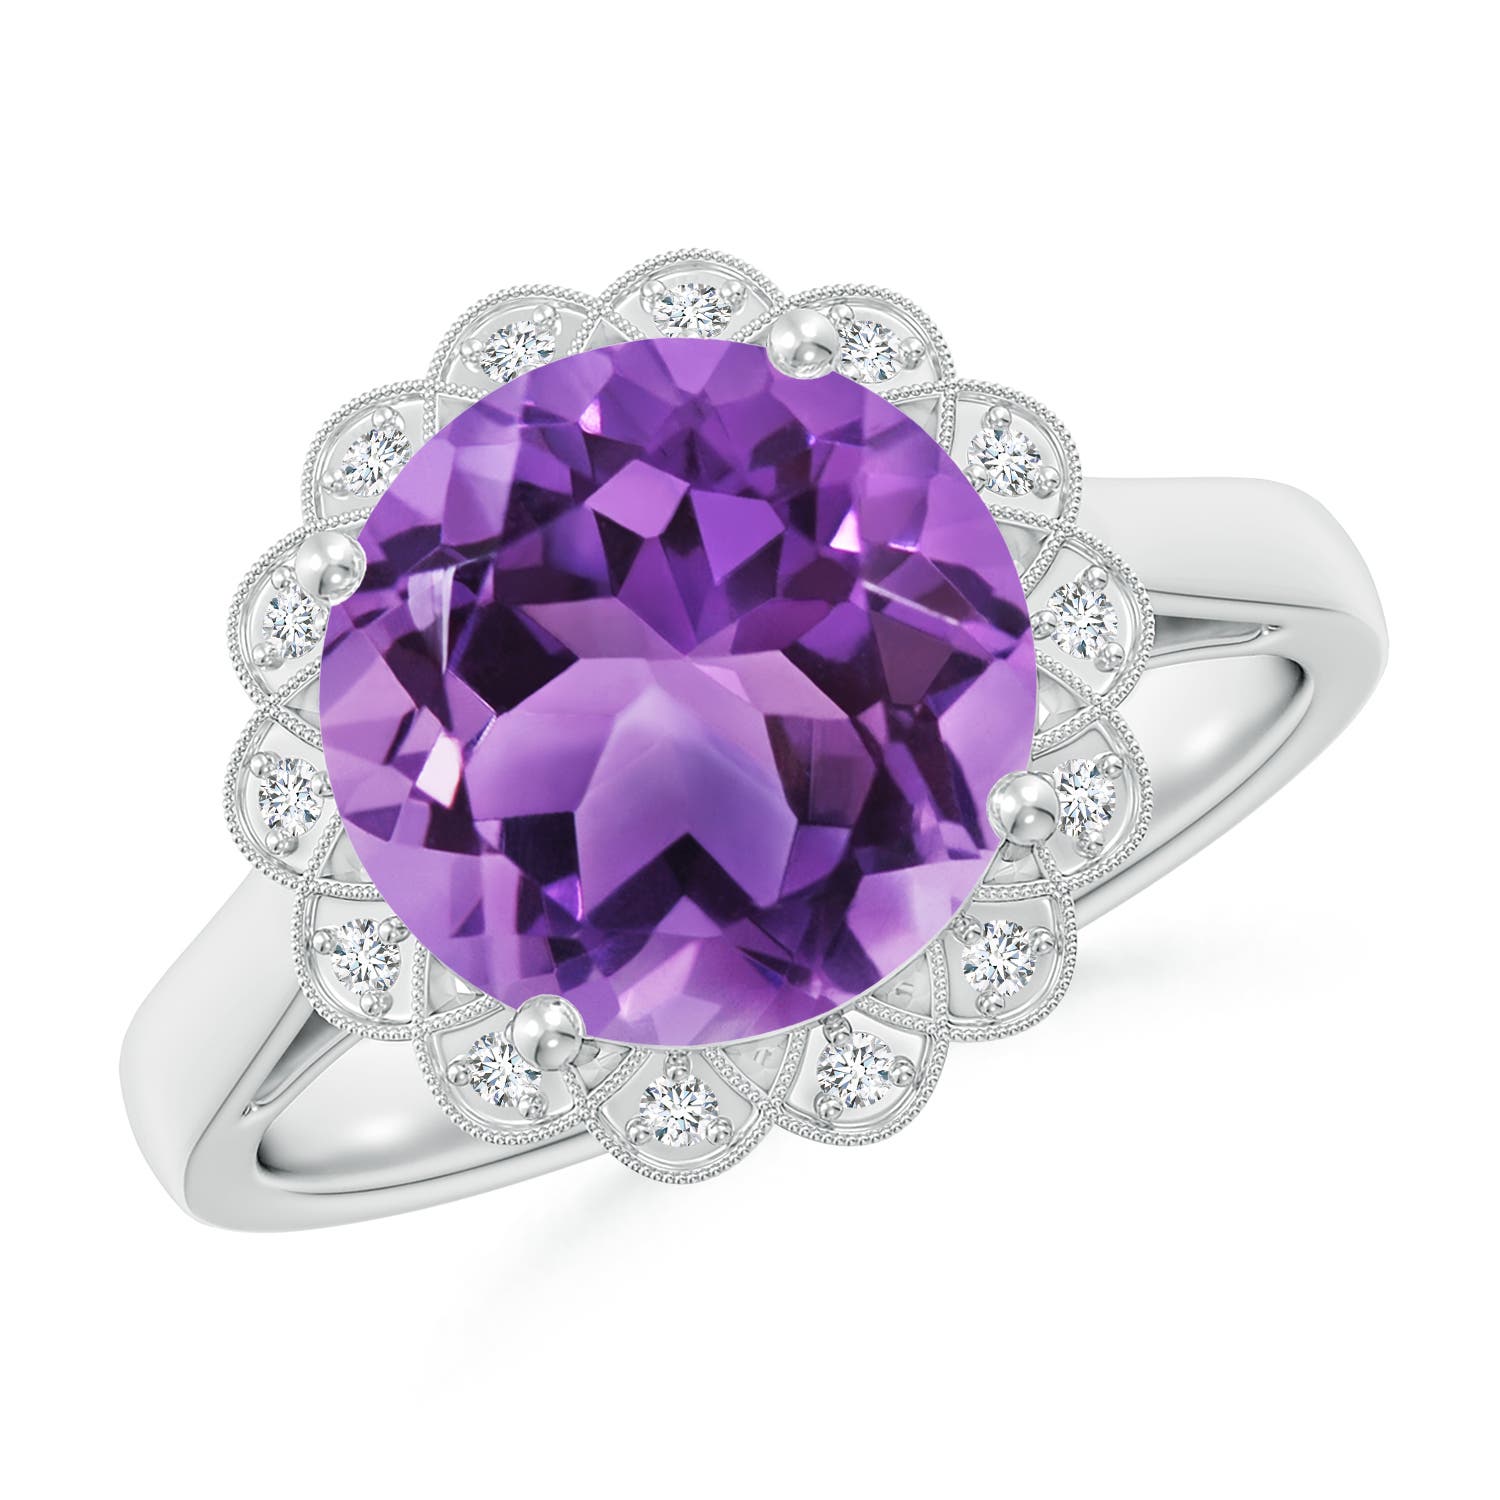 AA- Amethyst / 3.28 CT / 14 KT White Gold